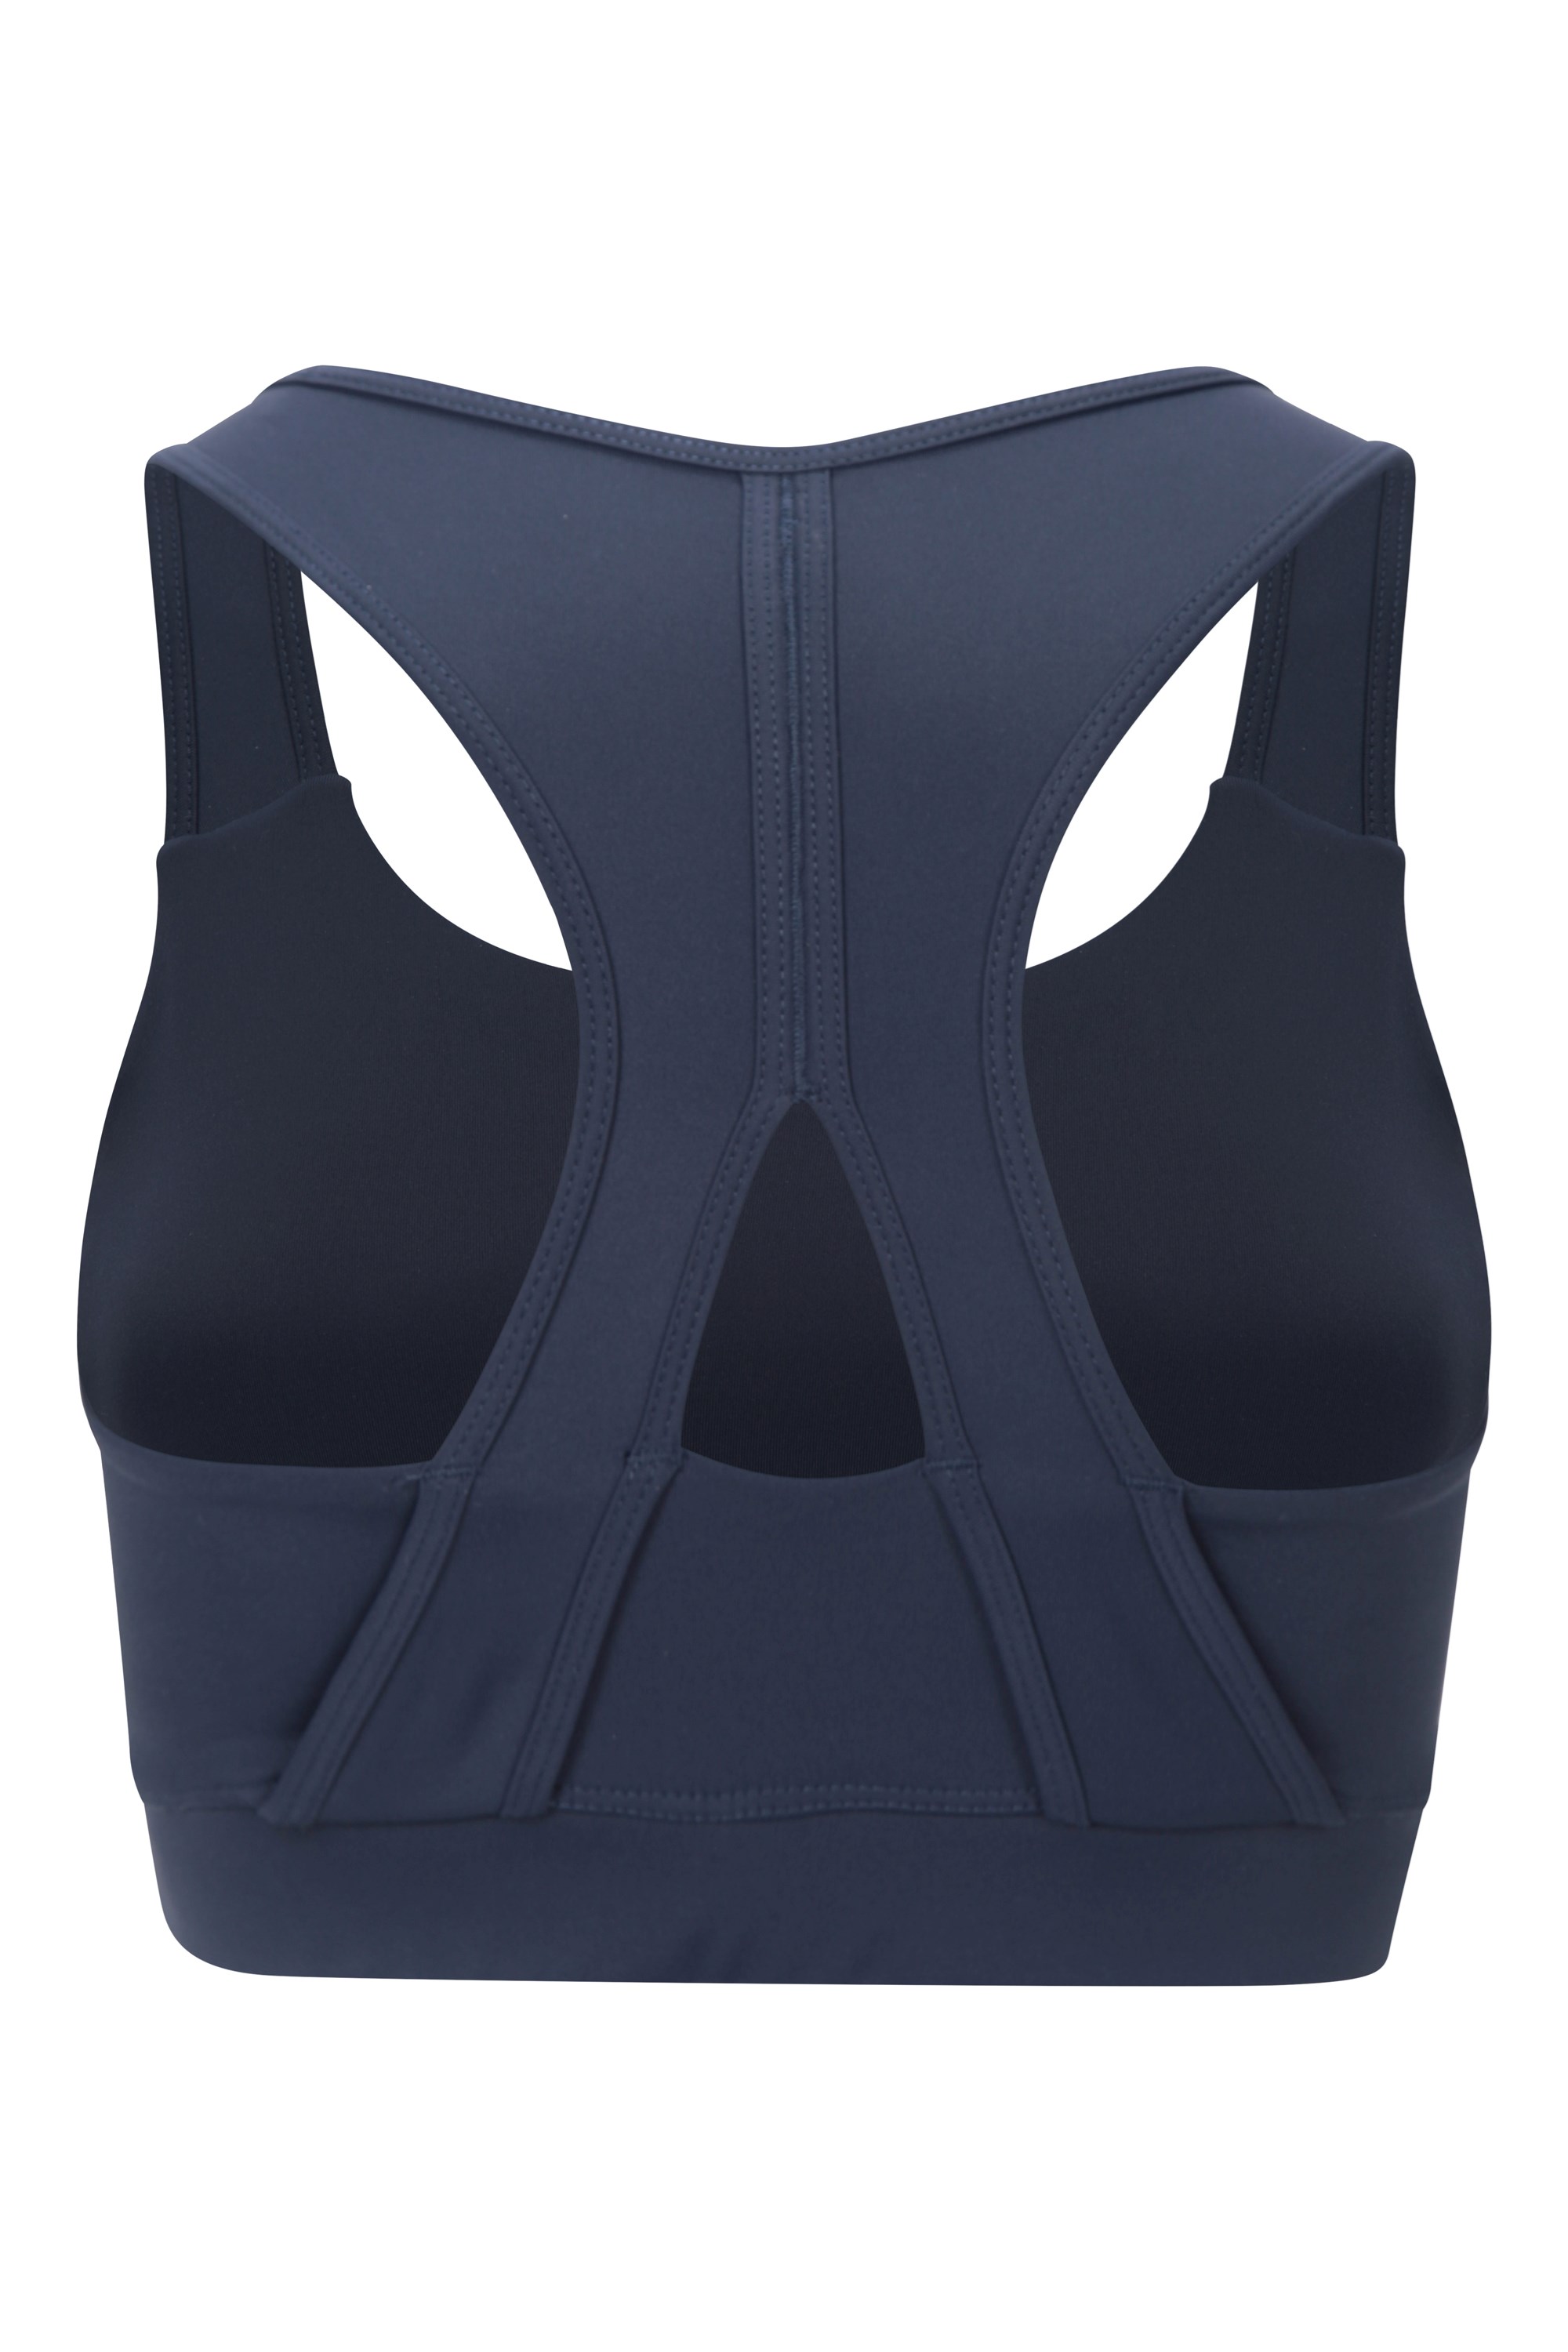 Mountain Warehouse Recycled Womens Sports Bra - Running, Cycling Navy 2 at   Women's Clothing store